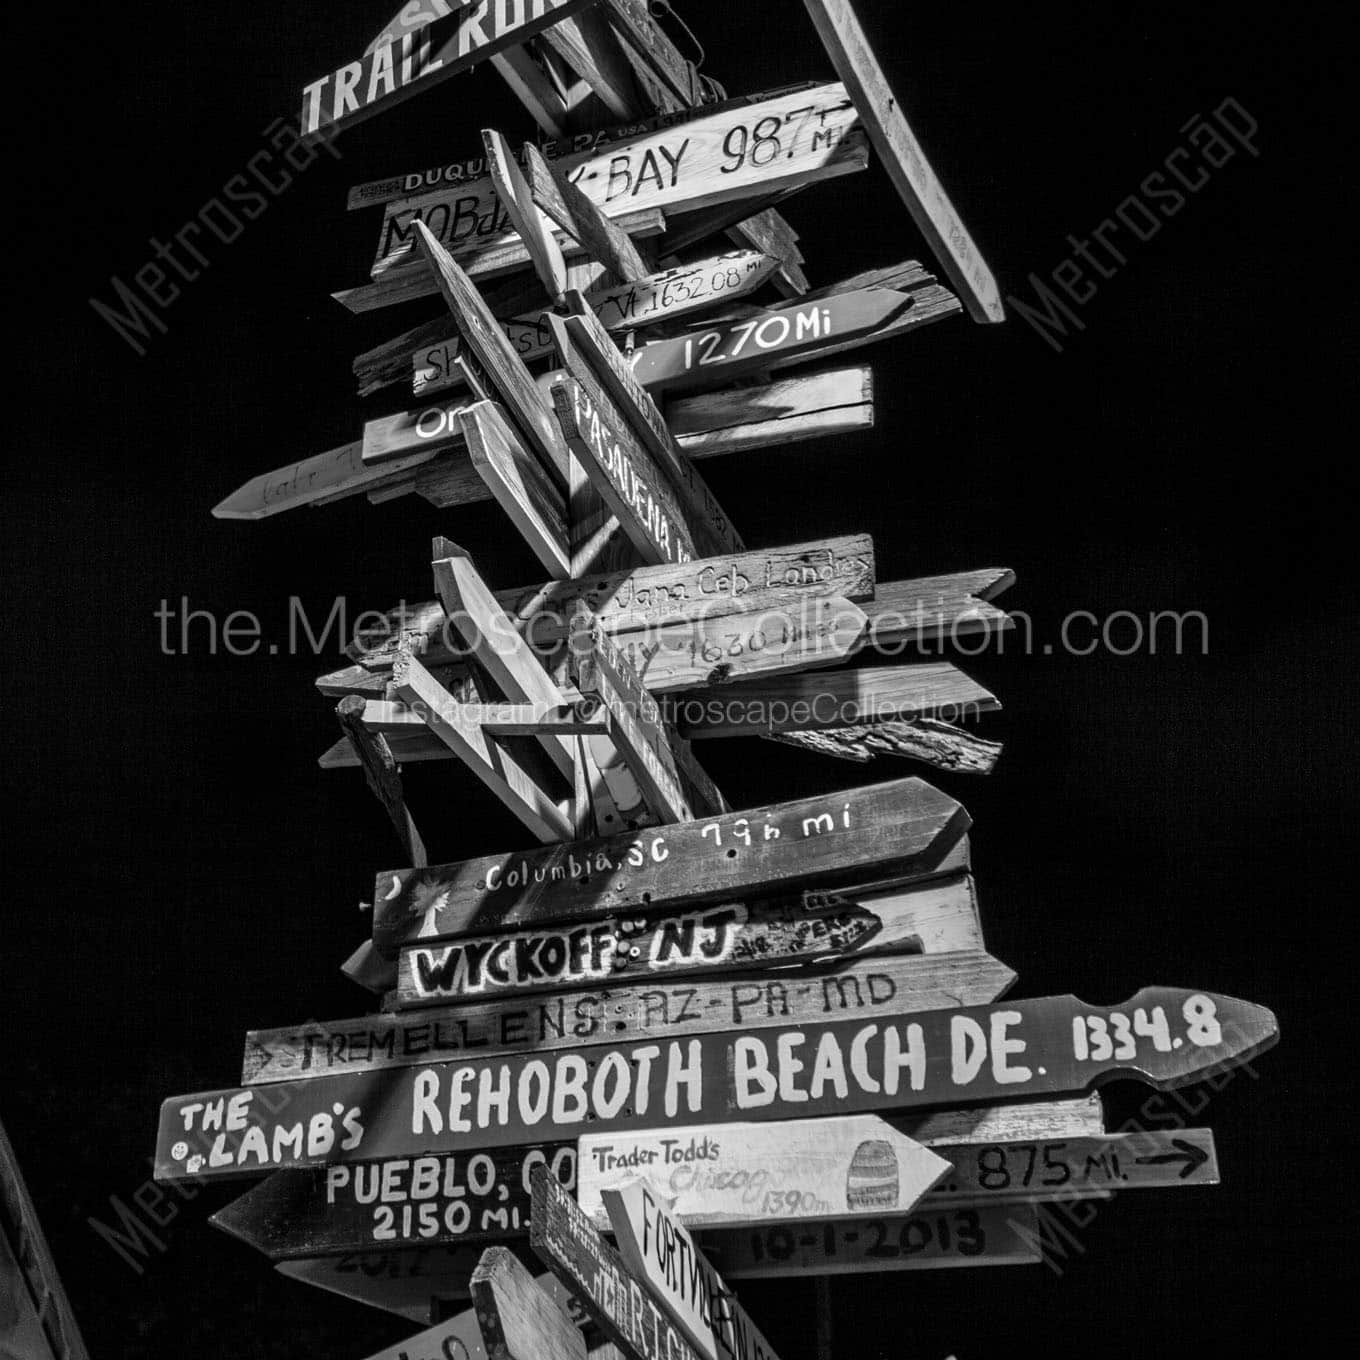 key west mileage sign post at night Black & White Office Art